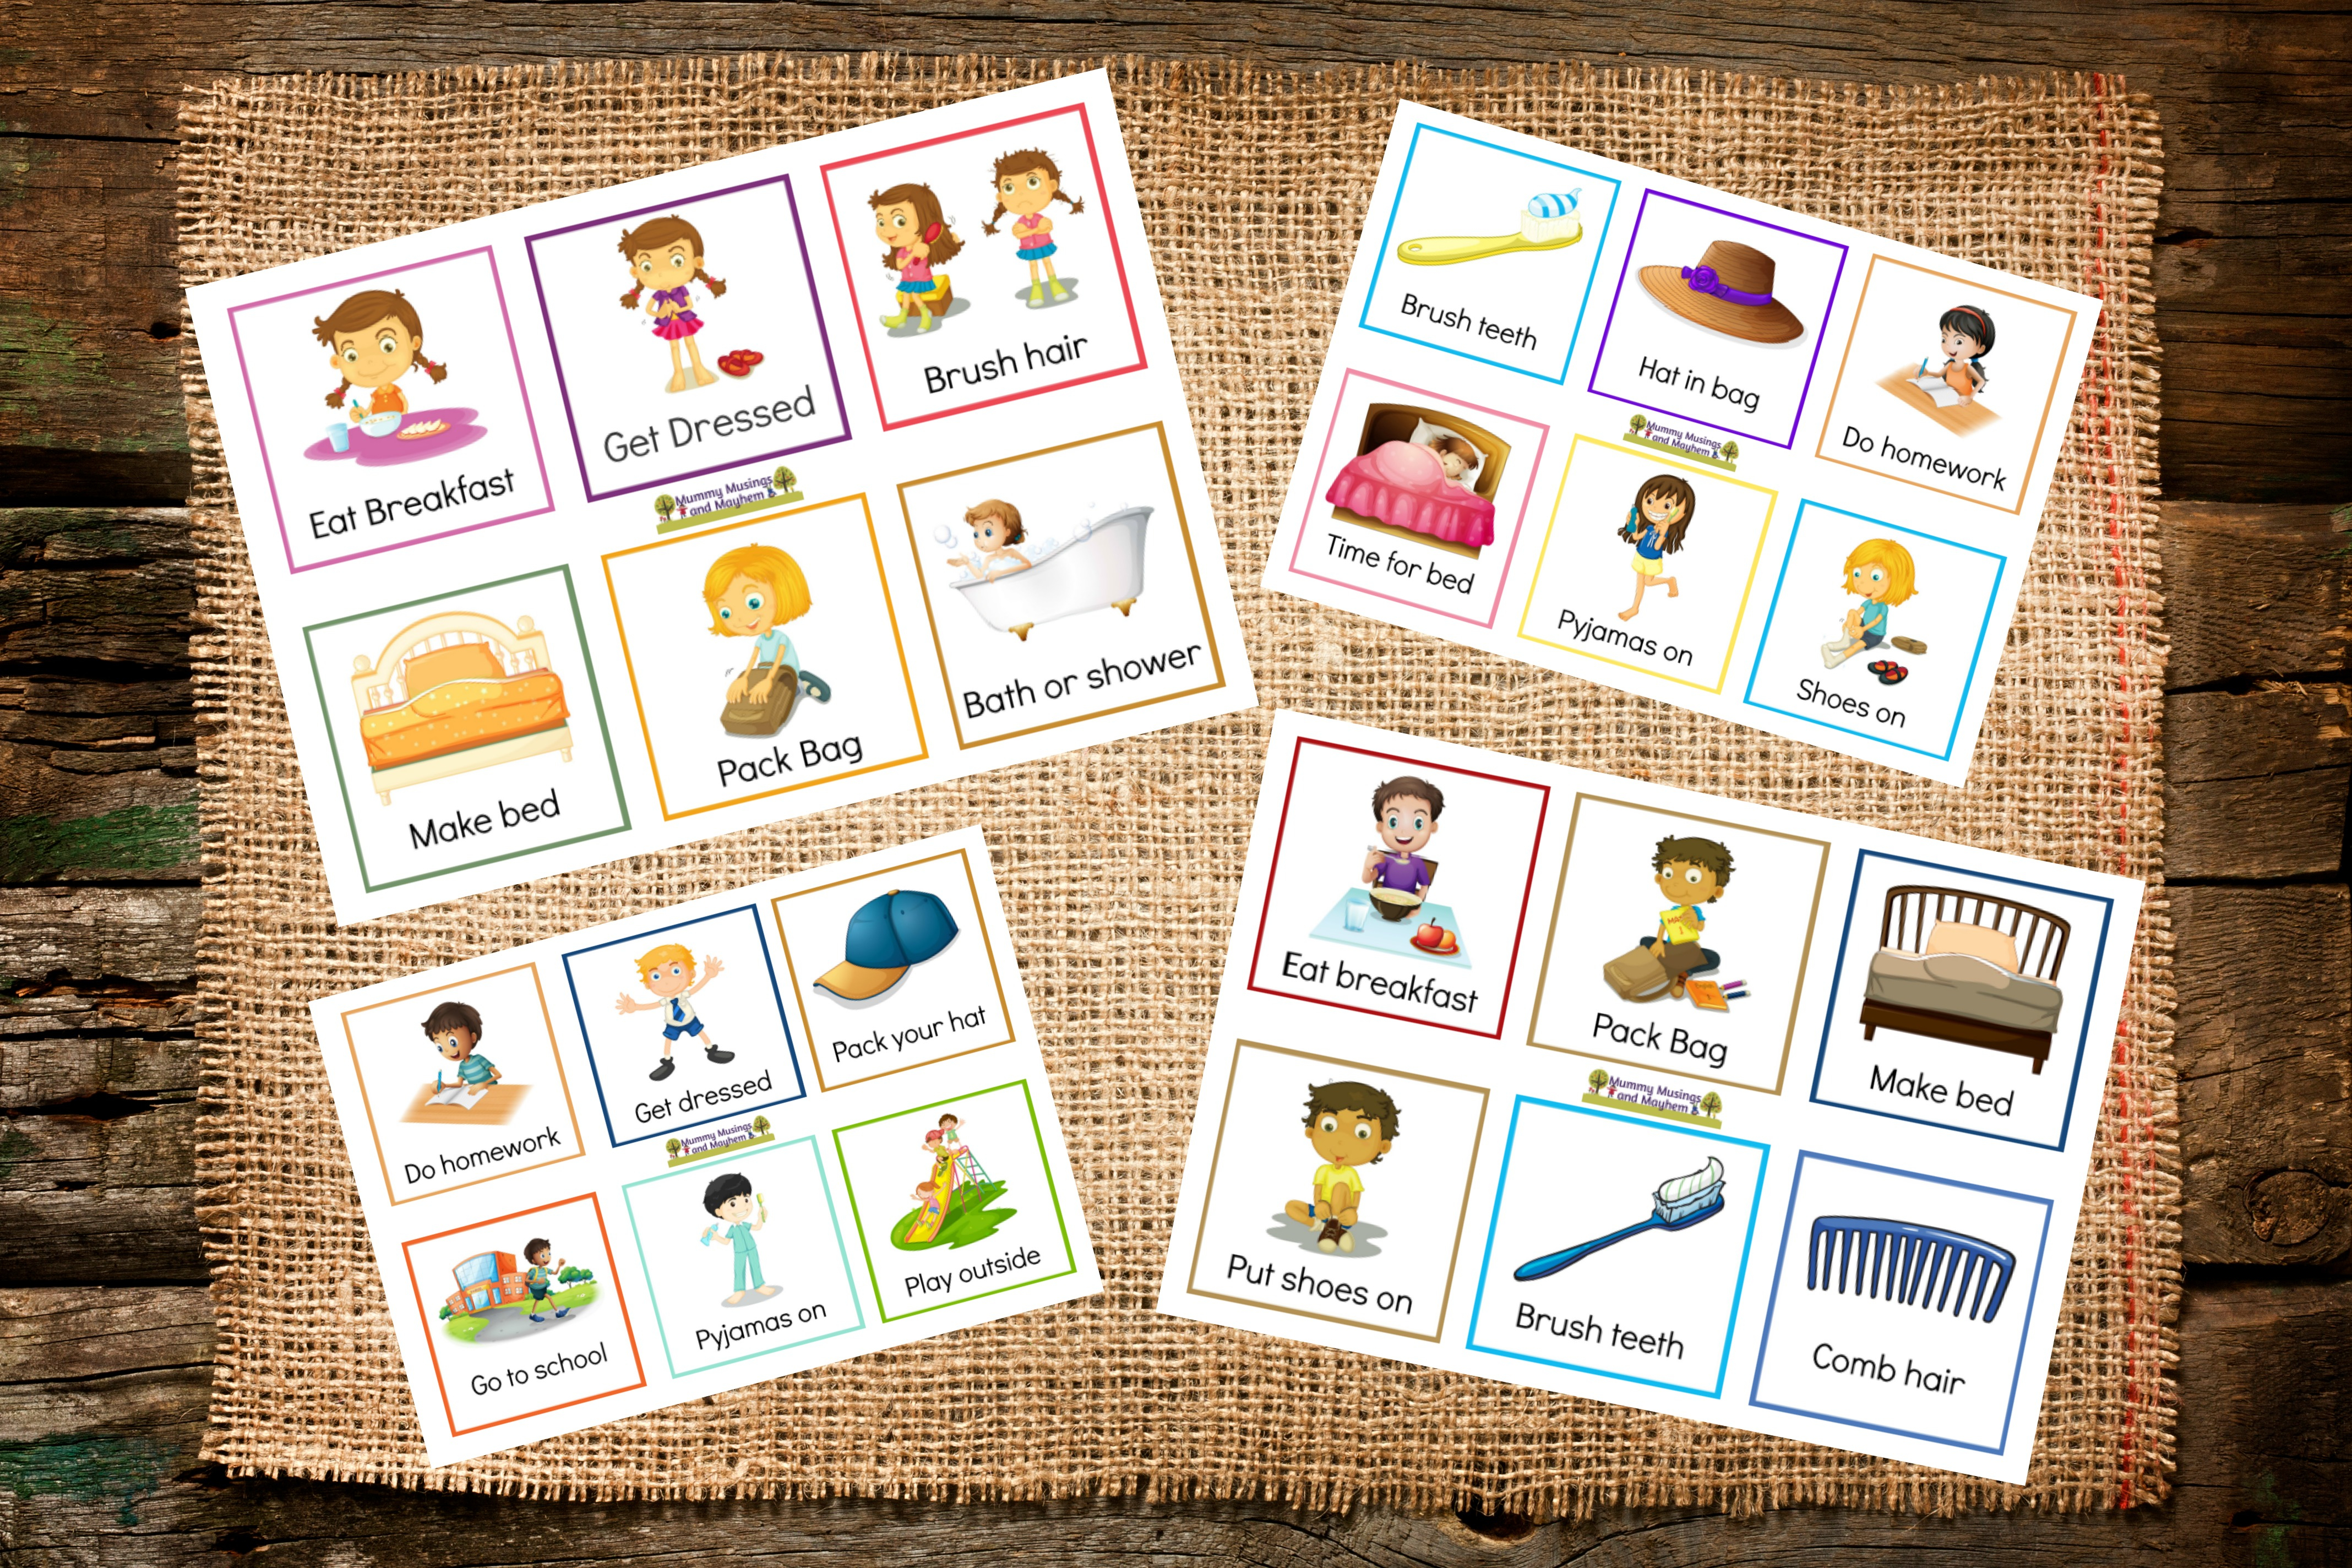 Back To School Routines - Free Printable Cards To Make It Easier - Free Printable Daily Routine Picture Cards